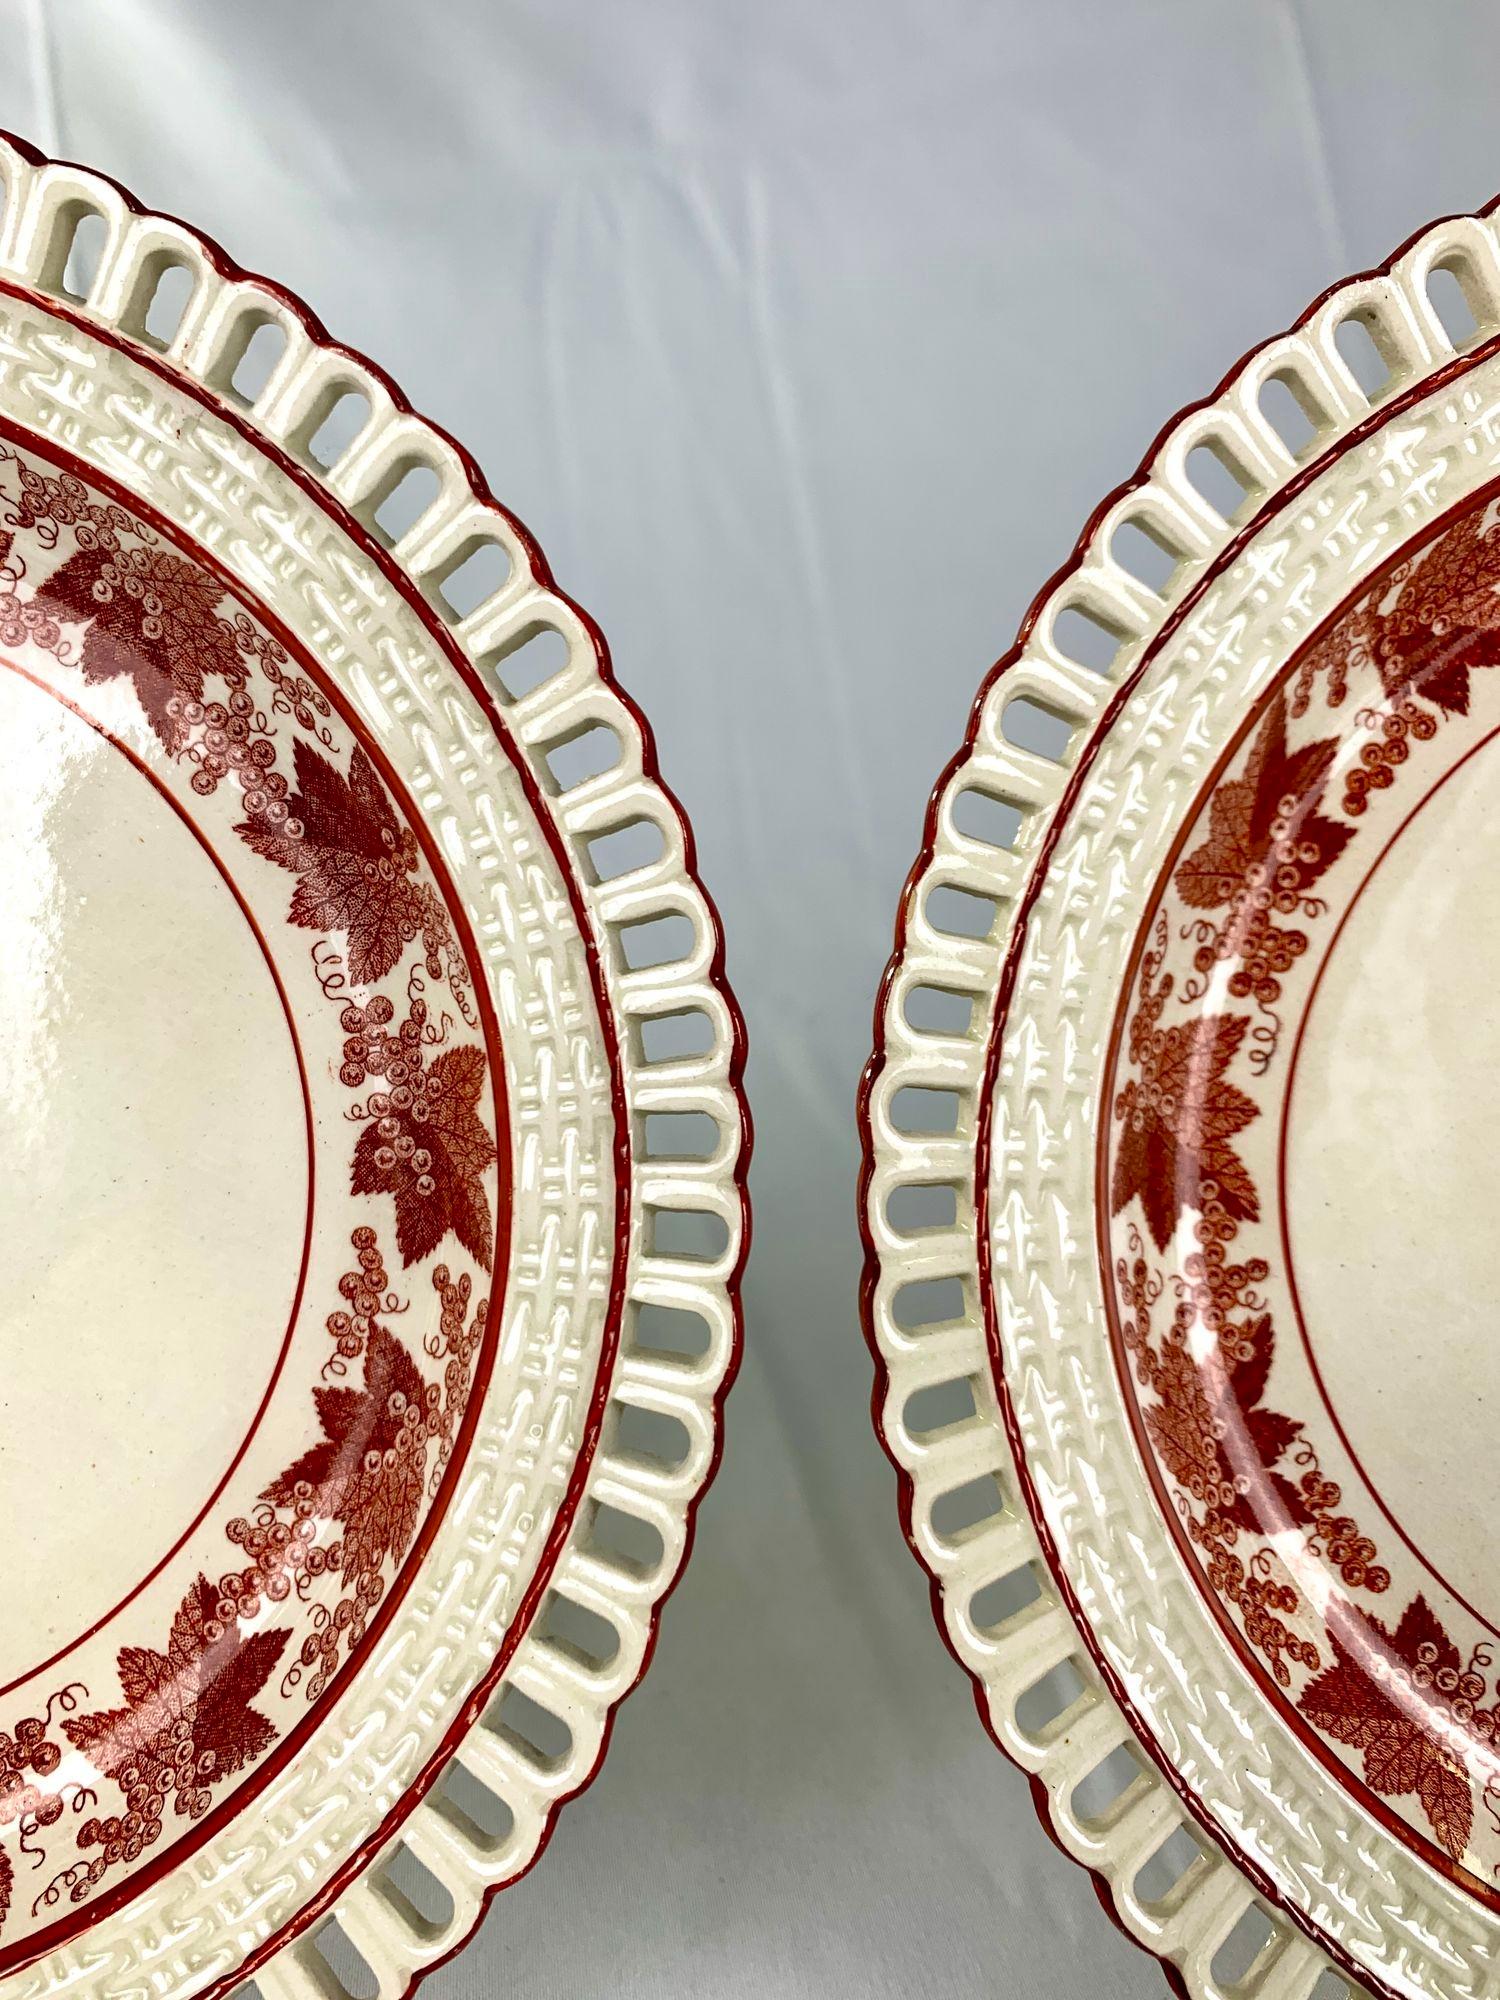 This pair of creamware dessert dishes dates to the early 19th century.
Made circa 1810, the dishes have beautiful decoration on their wide borders.
The borders consist of three concentric bands, each of which is encircled by a thin red line.
The